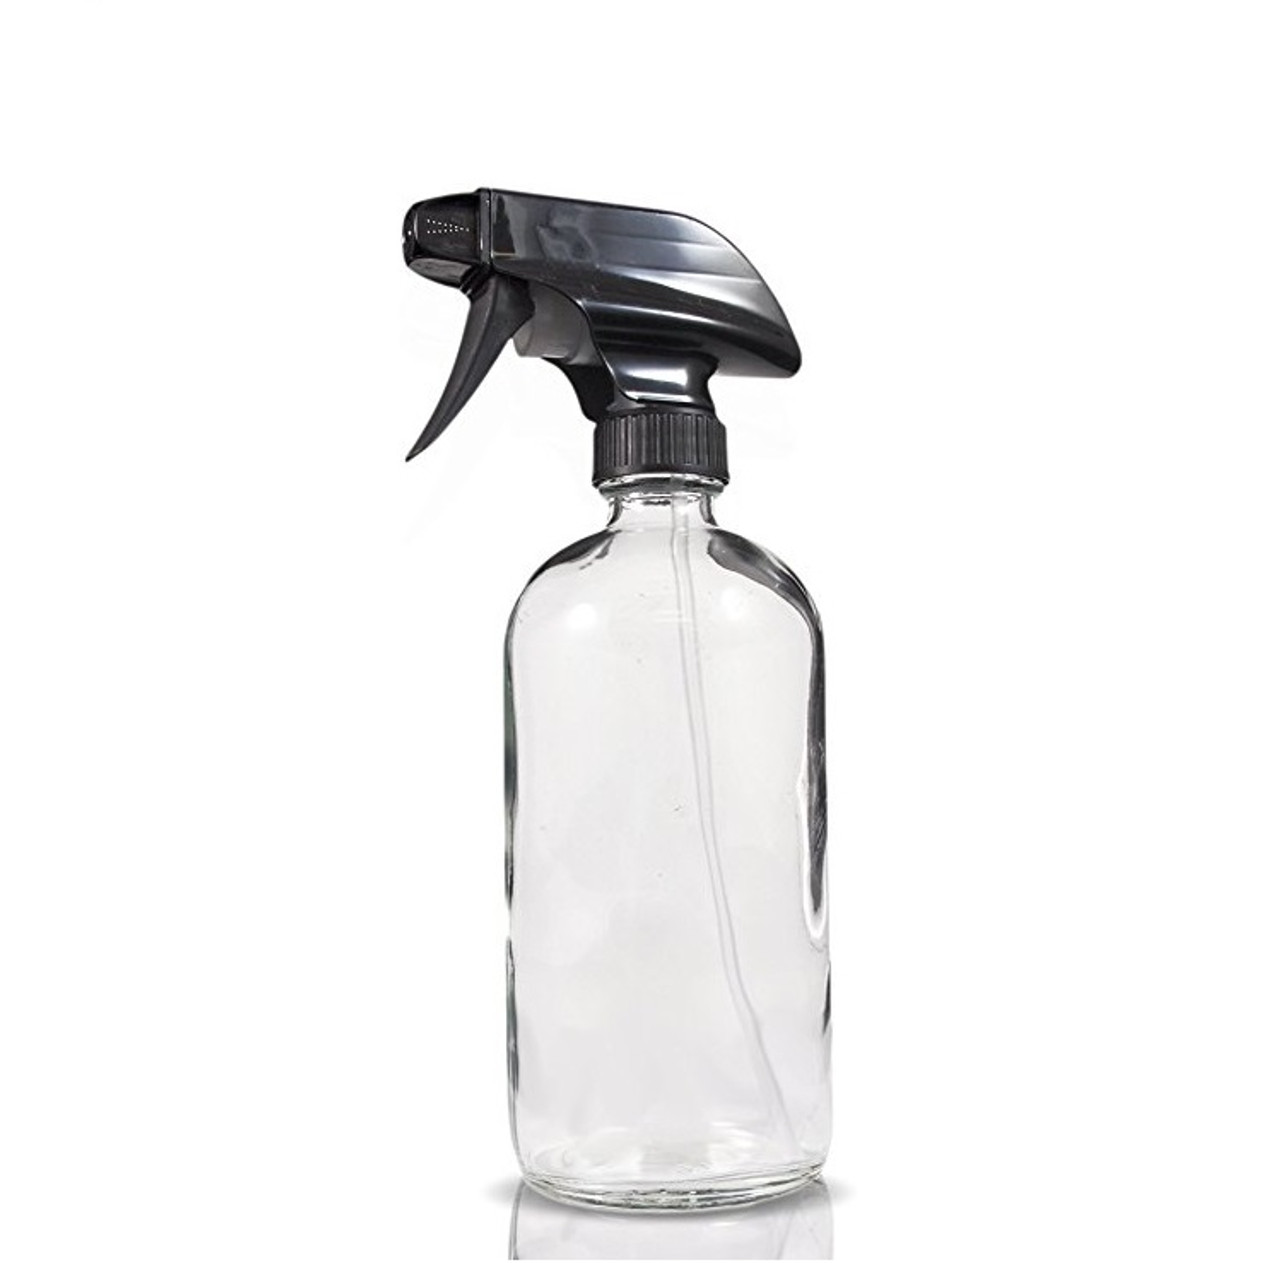 16 Oz Clear Glass Boston Round Bottle With 28 400 Neck Finish With Black Trigger Sprayer